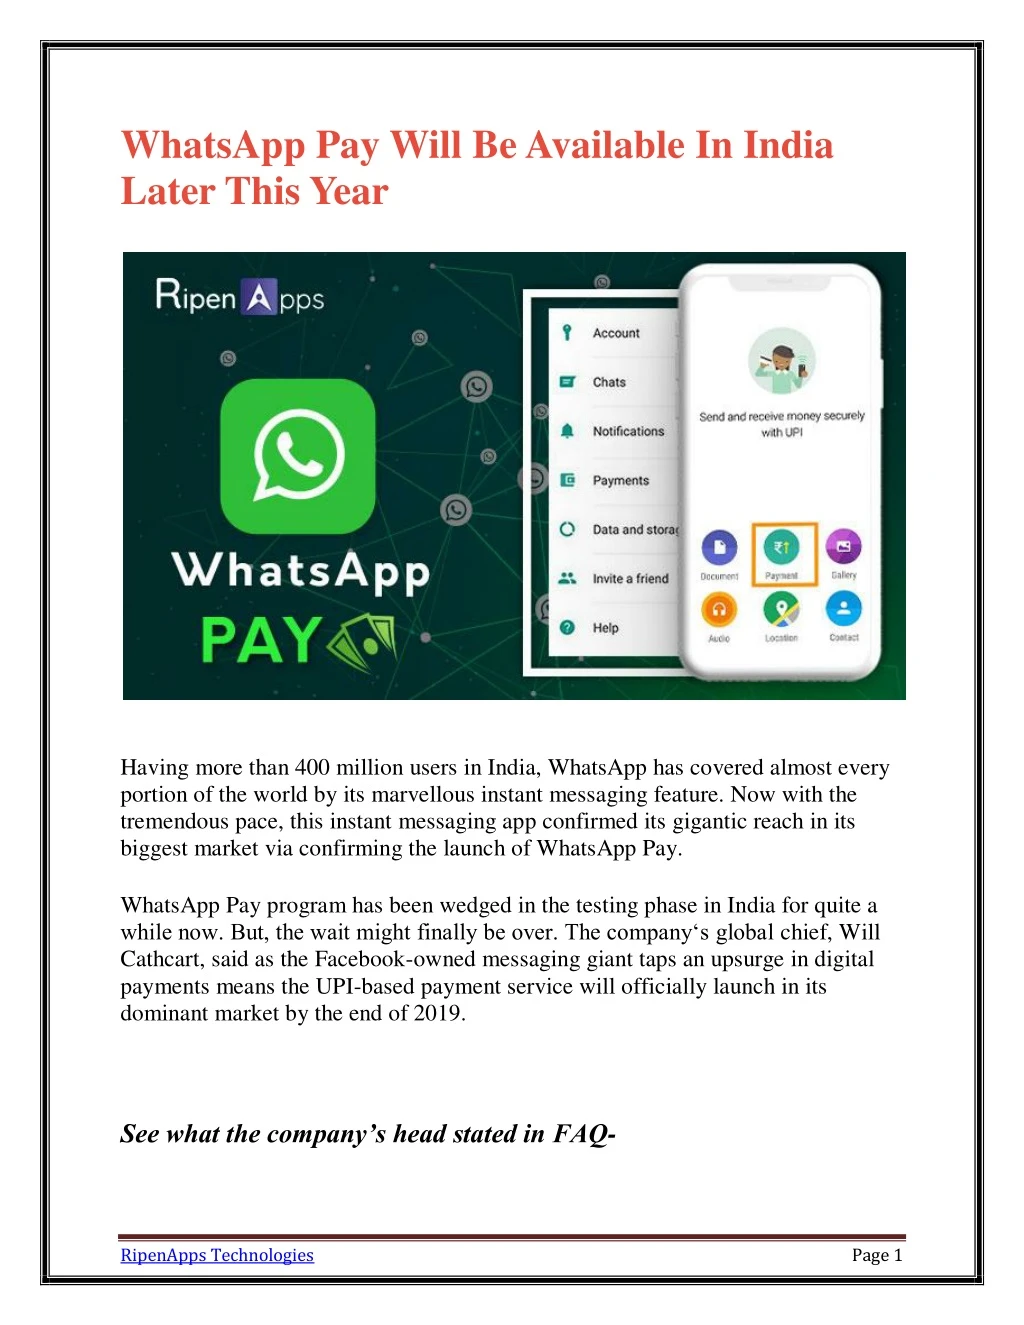 whatsapp pay will be available in india later